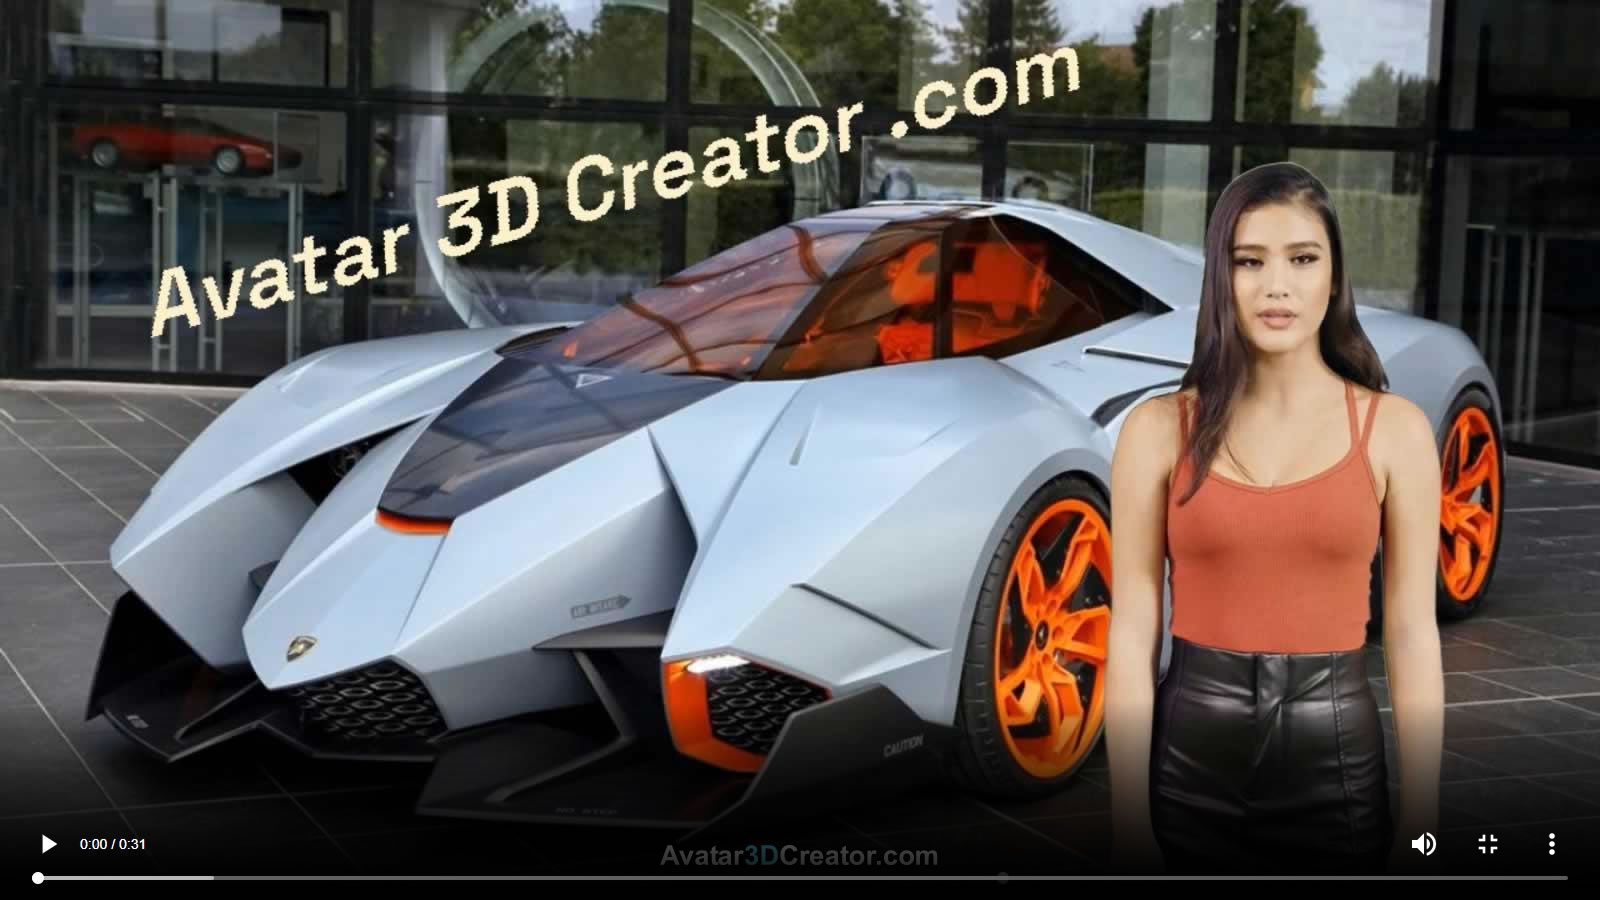 A 3D PRESENTER SPONSORING YOUR COMPANY?